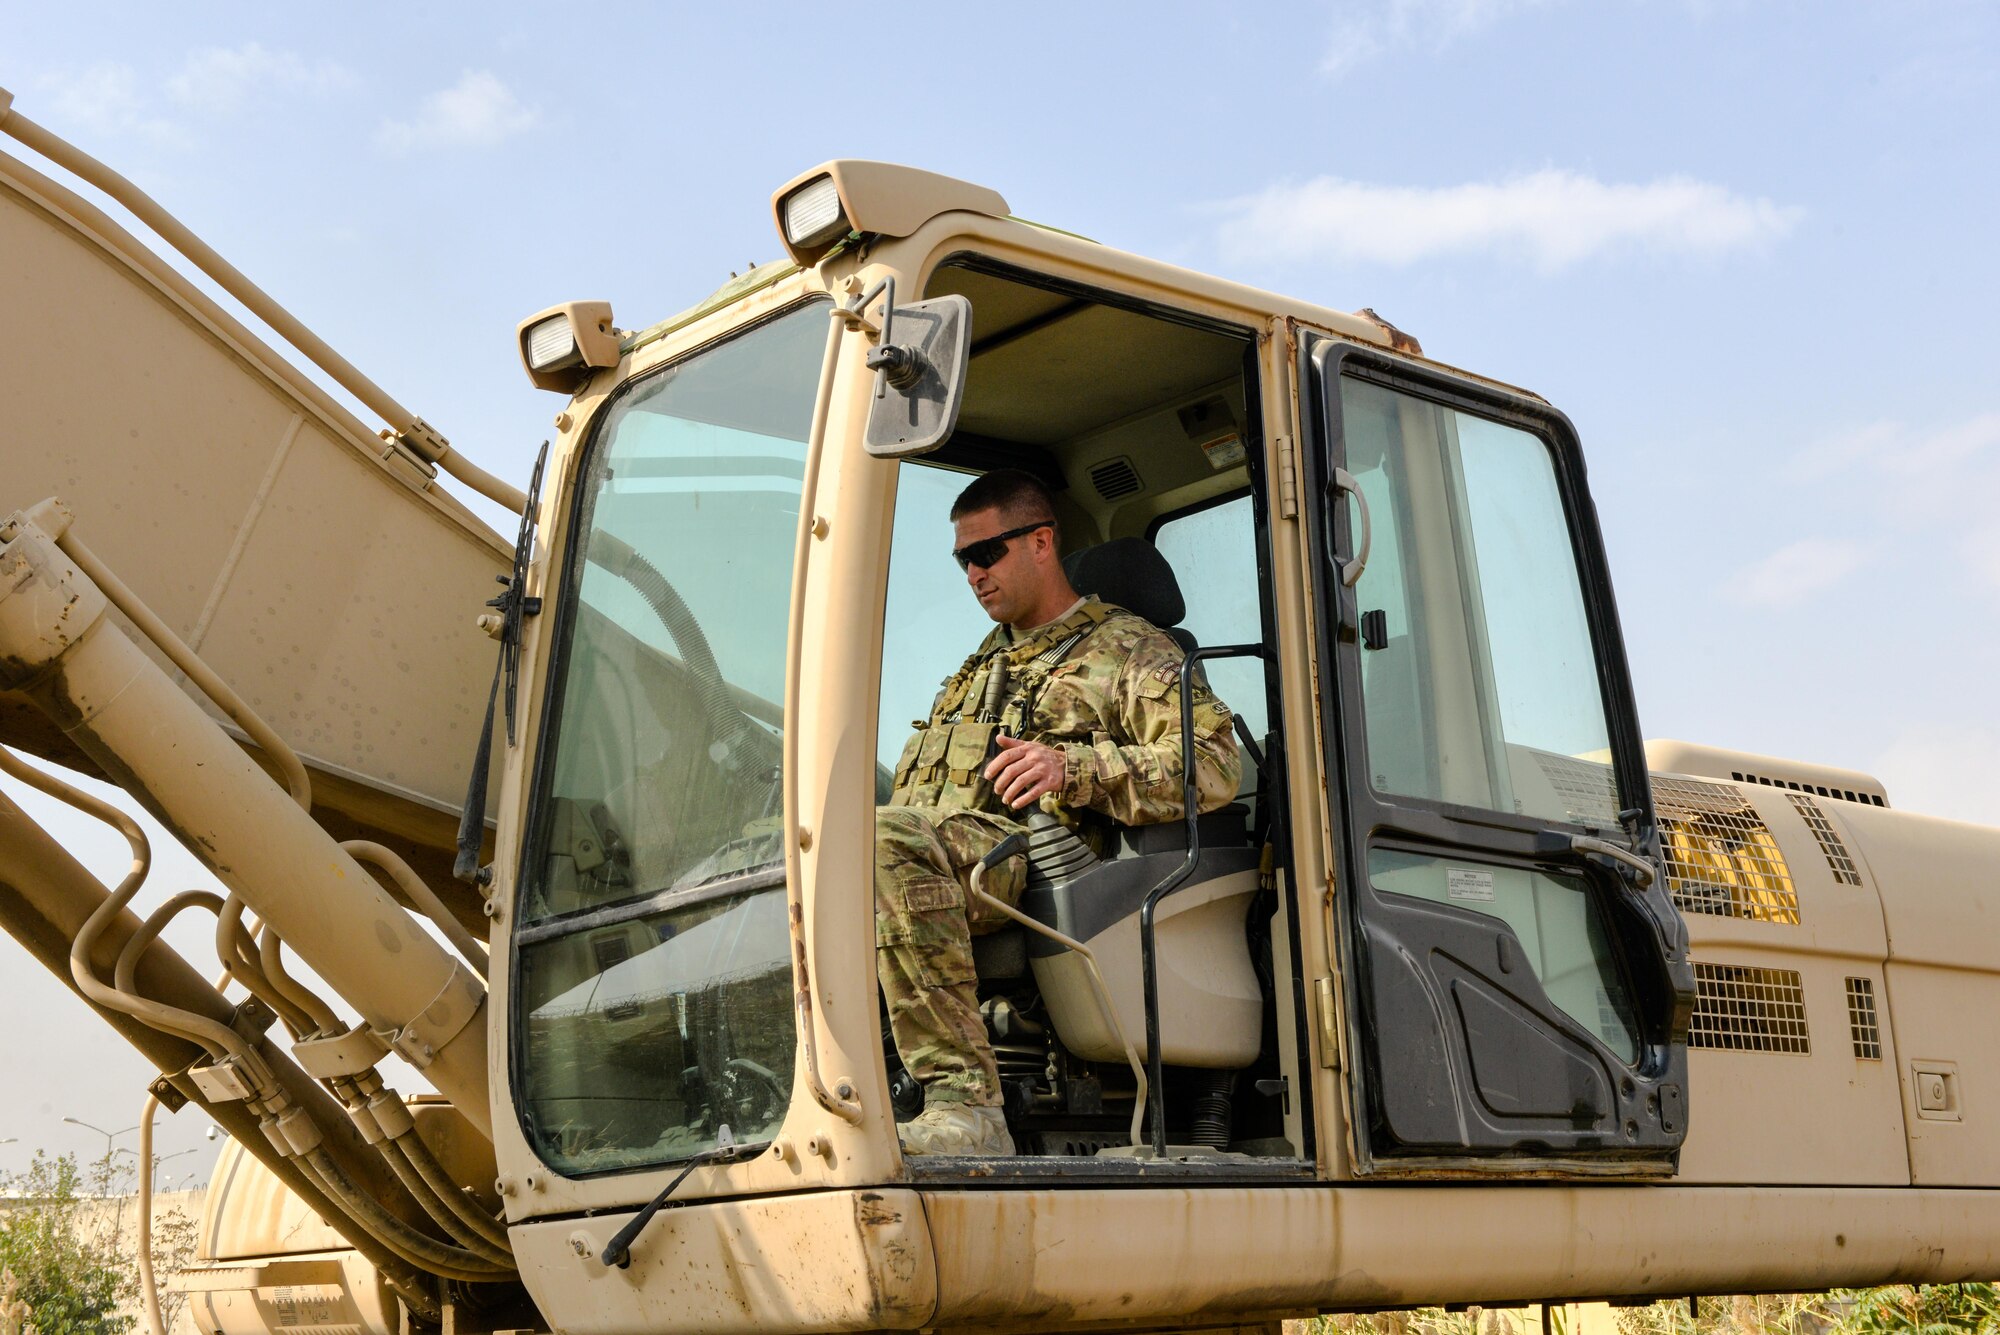 Master Sgt. Thomas Ryan, Train, Advise, Assist Command-Air (TAAC-Air) civil engineer advisor, operates an excavator while clearing reeds from a field at Kabul Air Wing, Afghanistan, Oct. 6, 2016. Ryan cleared an area about 350-meters long, 20-meters wide and 7-meters deep of reeds that had grown in excess of 15 feet tall. (U.S. Air Force photo by Tech. Sgt. Christopher Holmes)